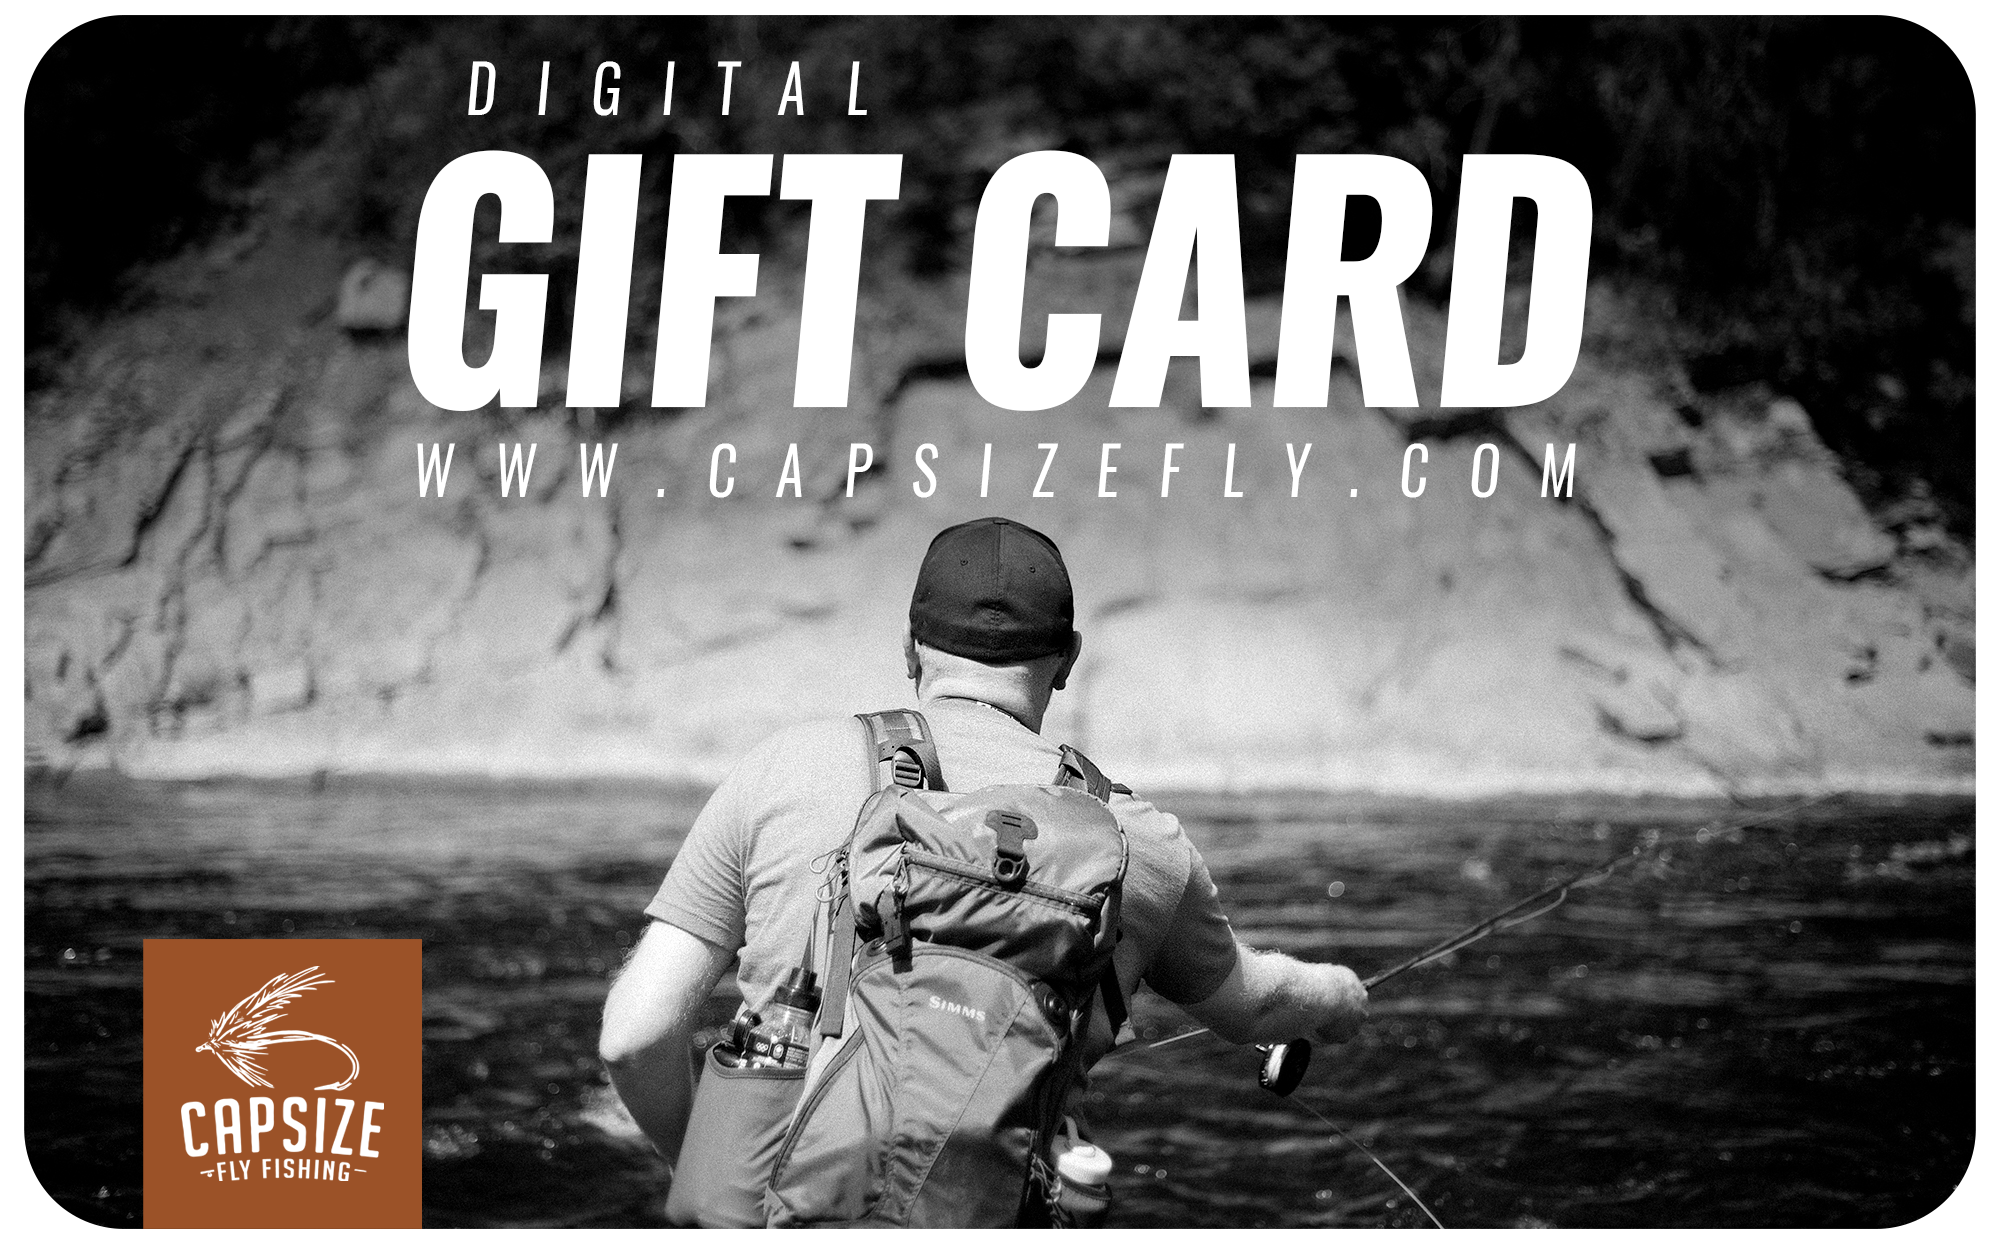 Fly Fishing Gift Card